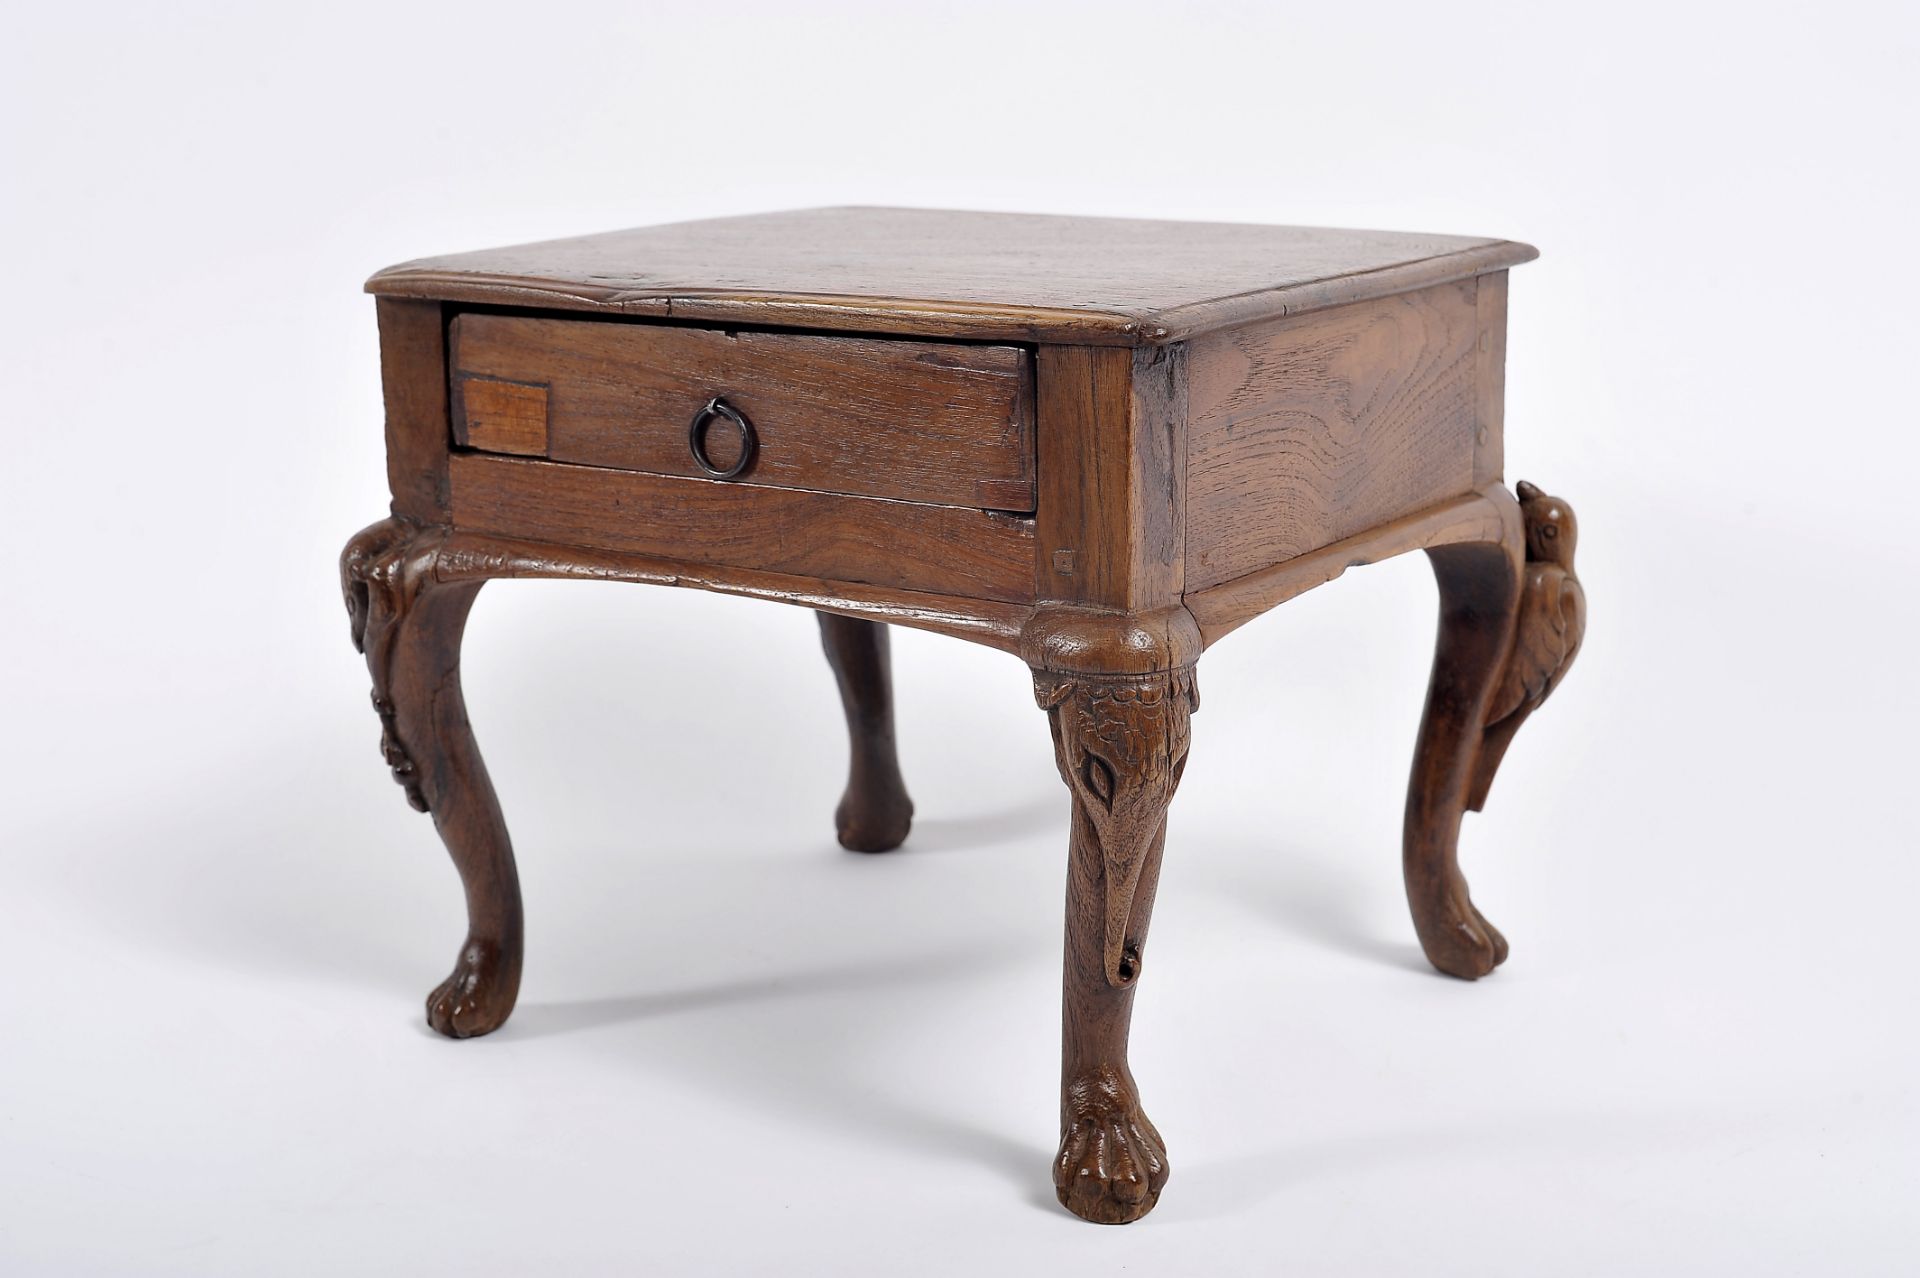 A small centre table with drawer